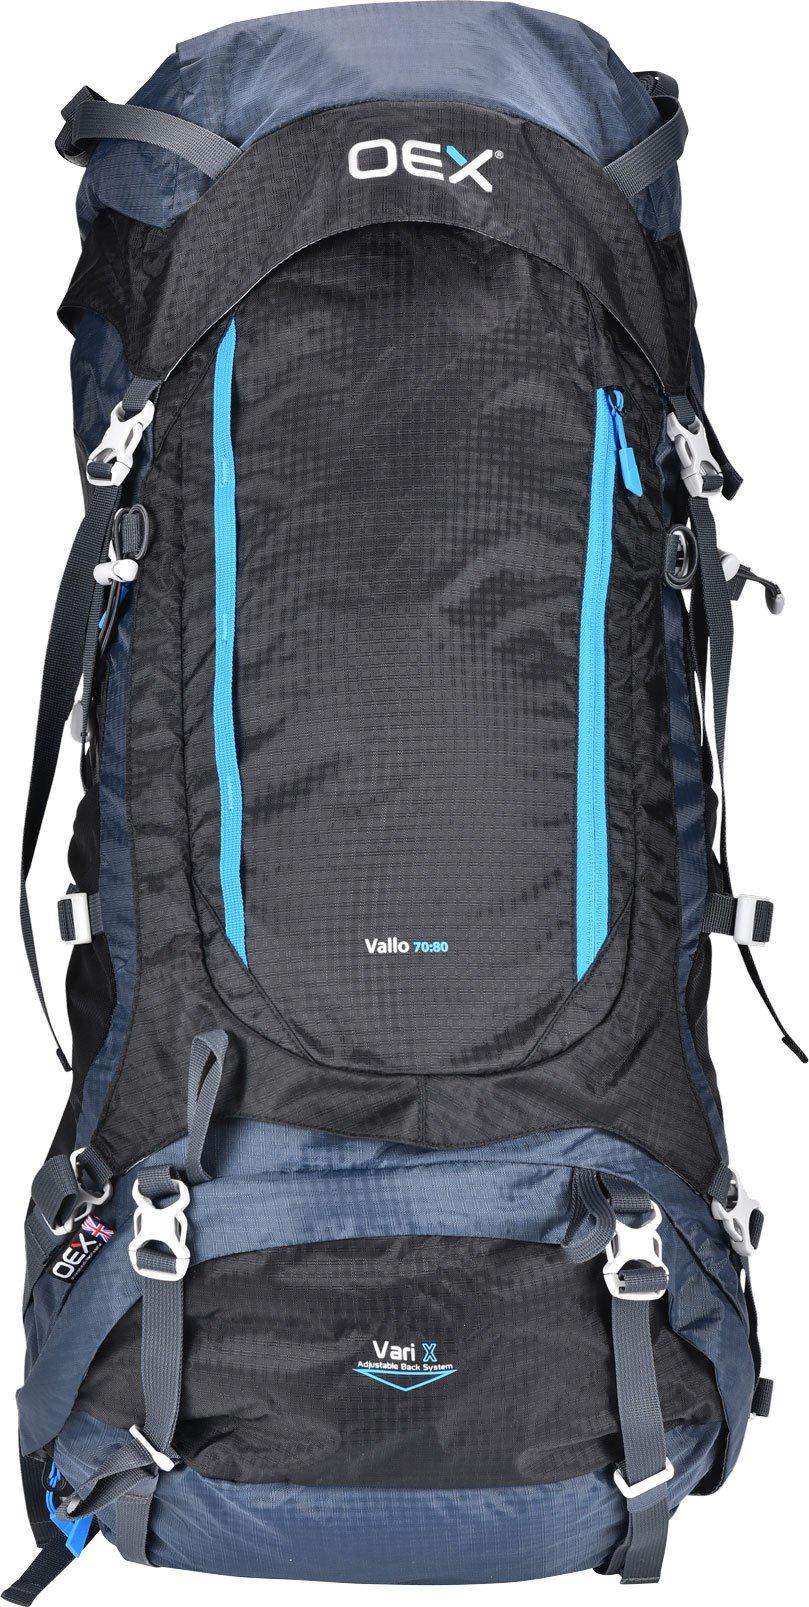 OEX Vallo EXP 70:80 Rucksack Review